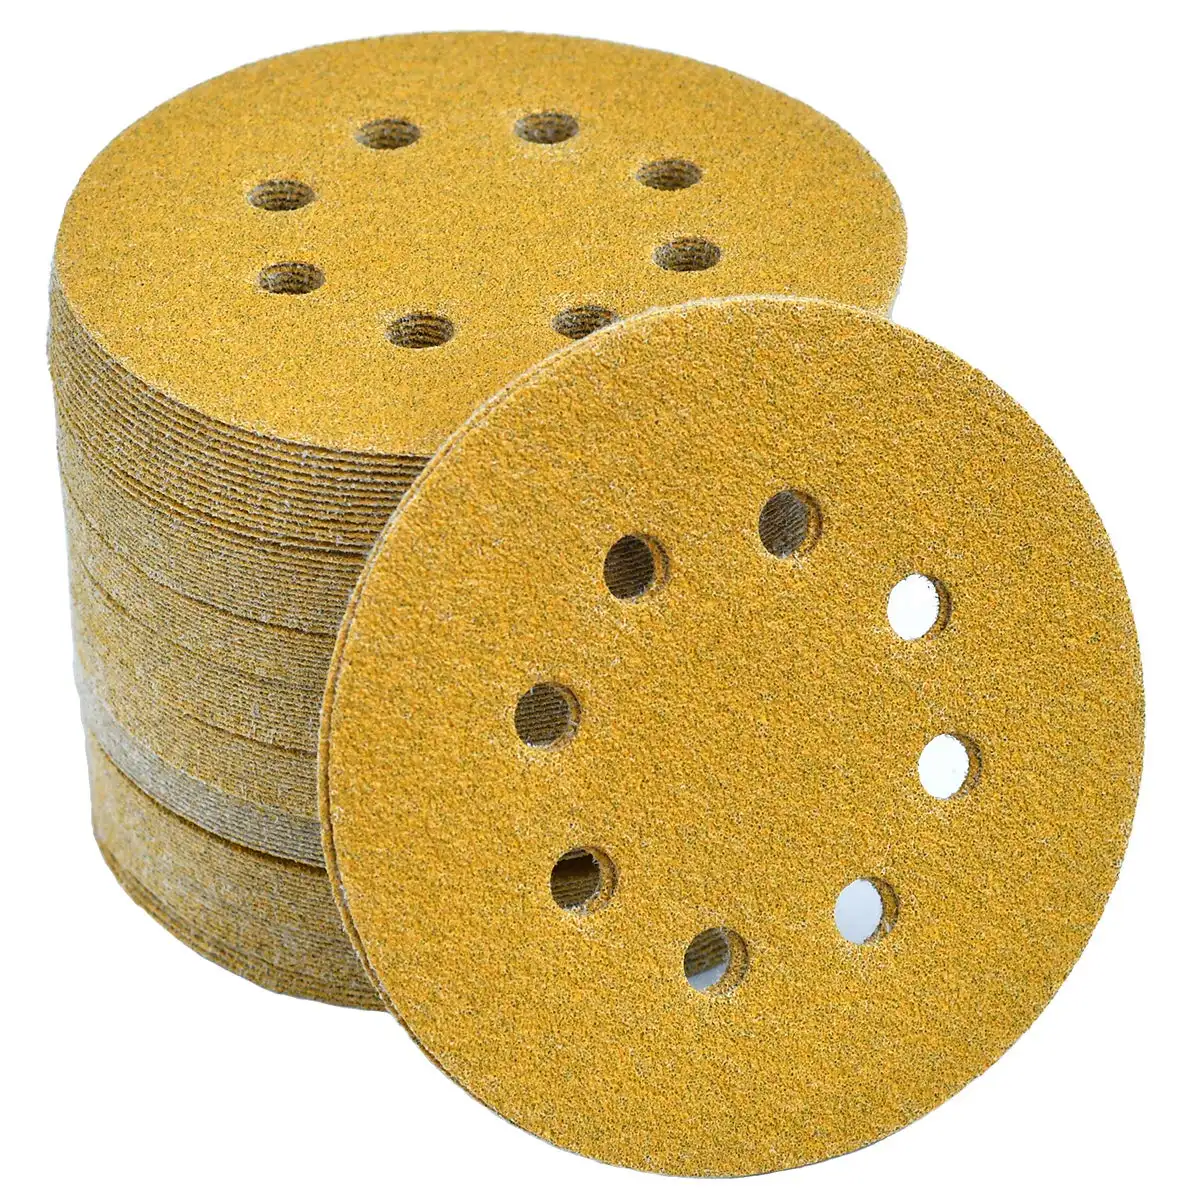 Pangea Adhesive 125 mm Yellow Sanding Discs Hook and Loop 5 inch Round Sand Disc for Wood Mental Car